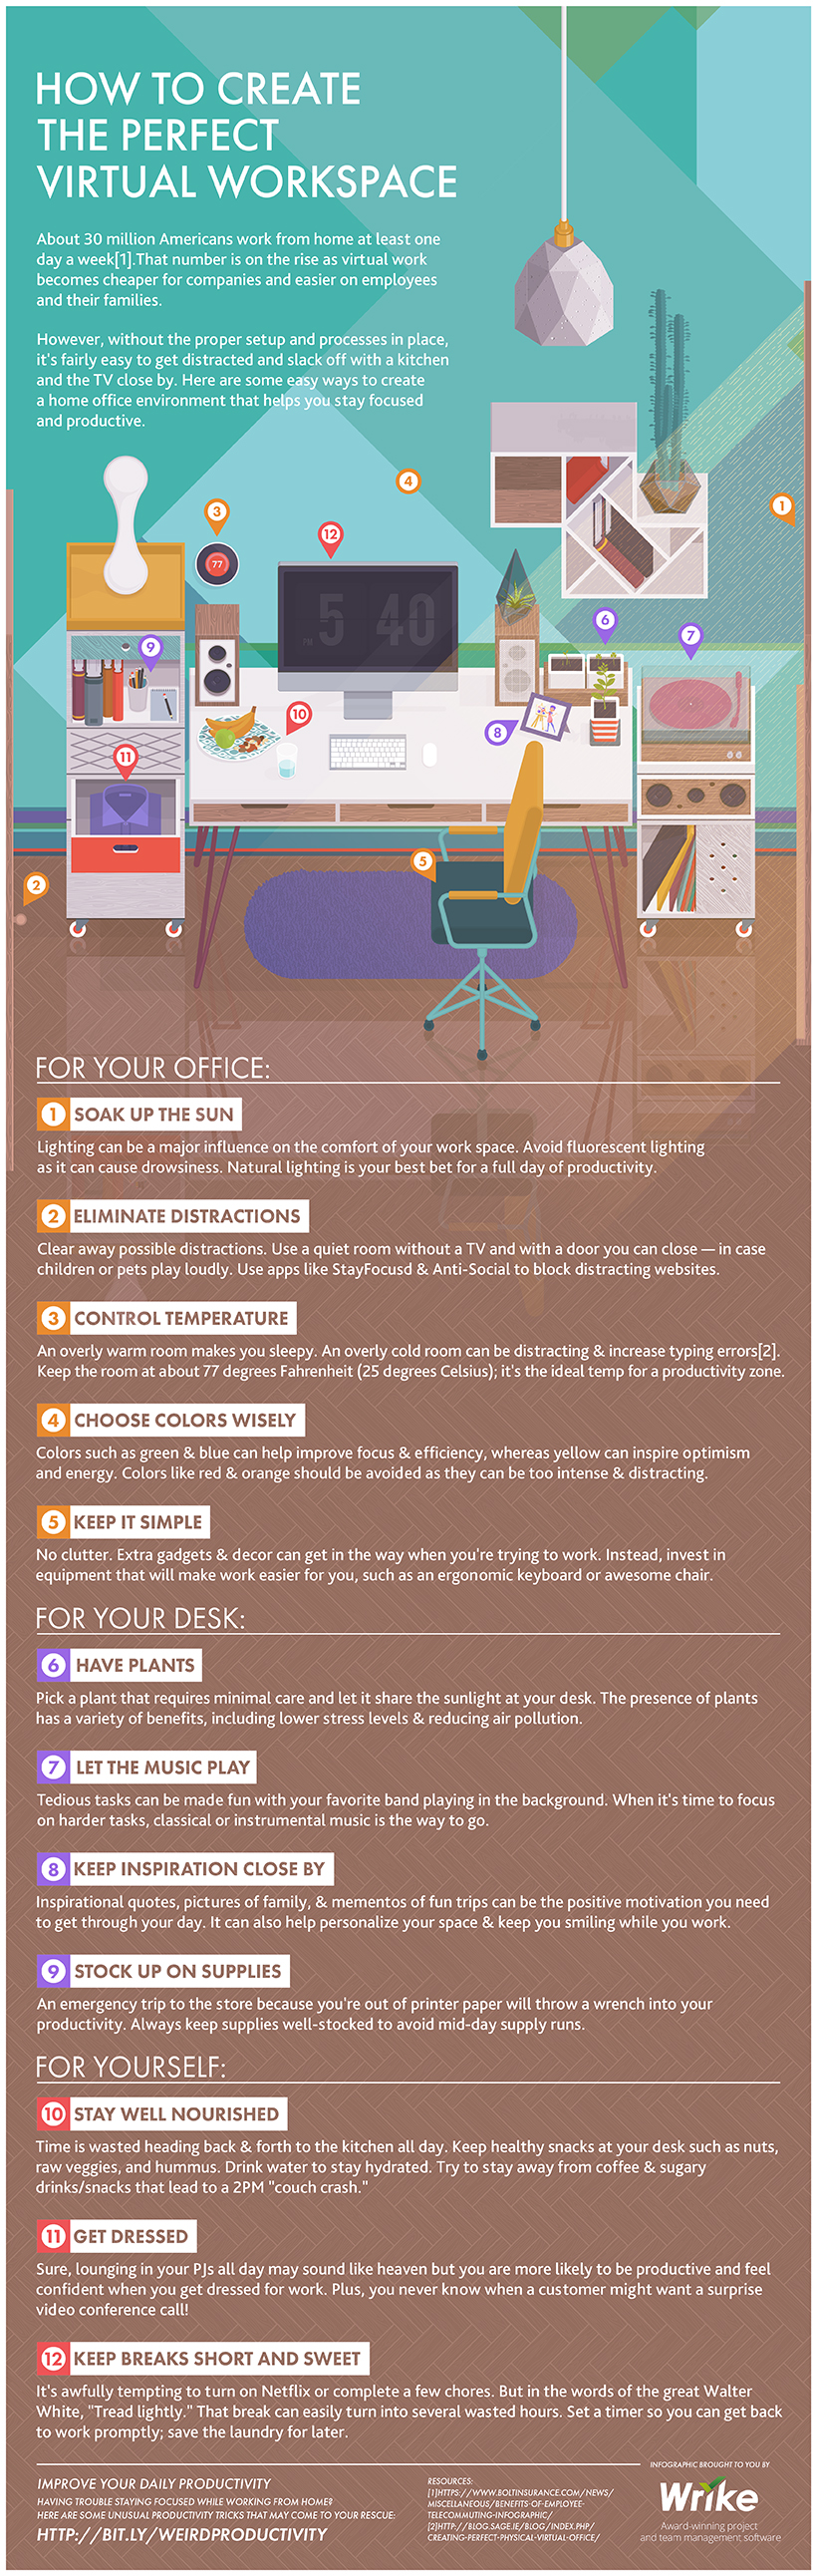 How to Create Your Perfect Remote Work Environment (Infographic)